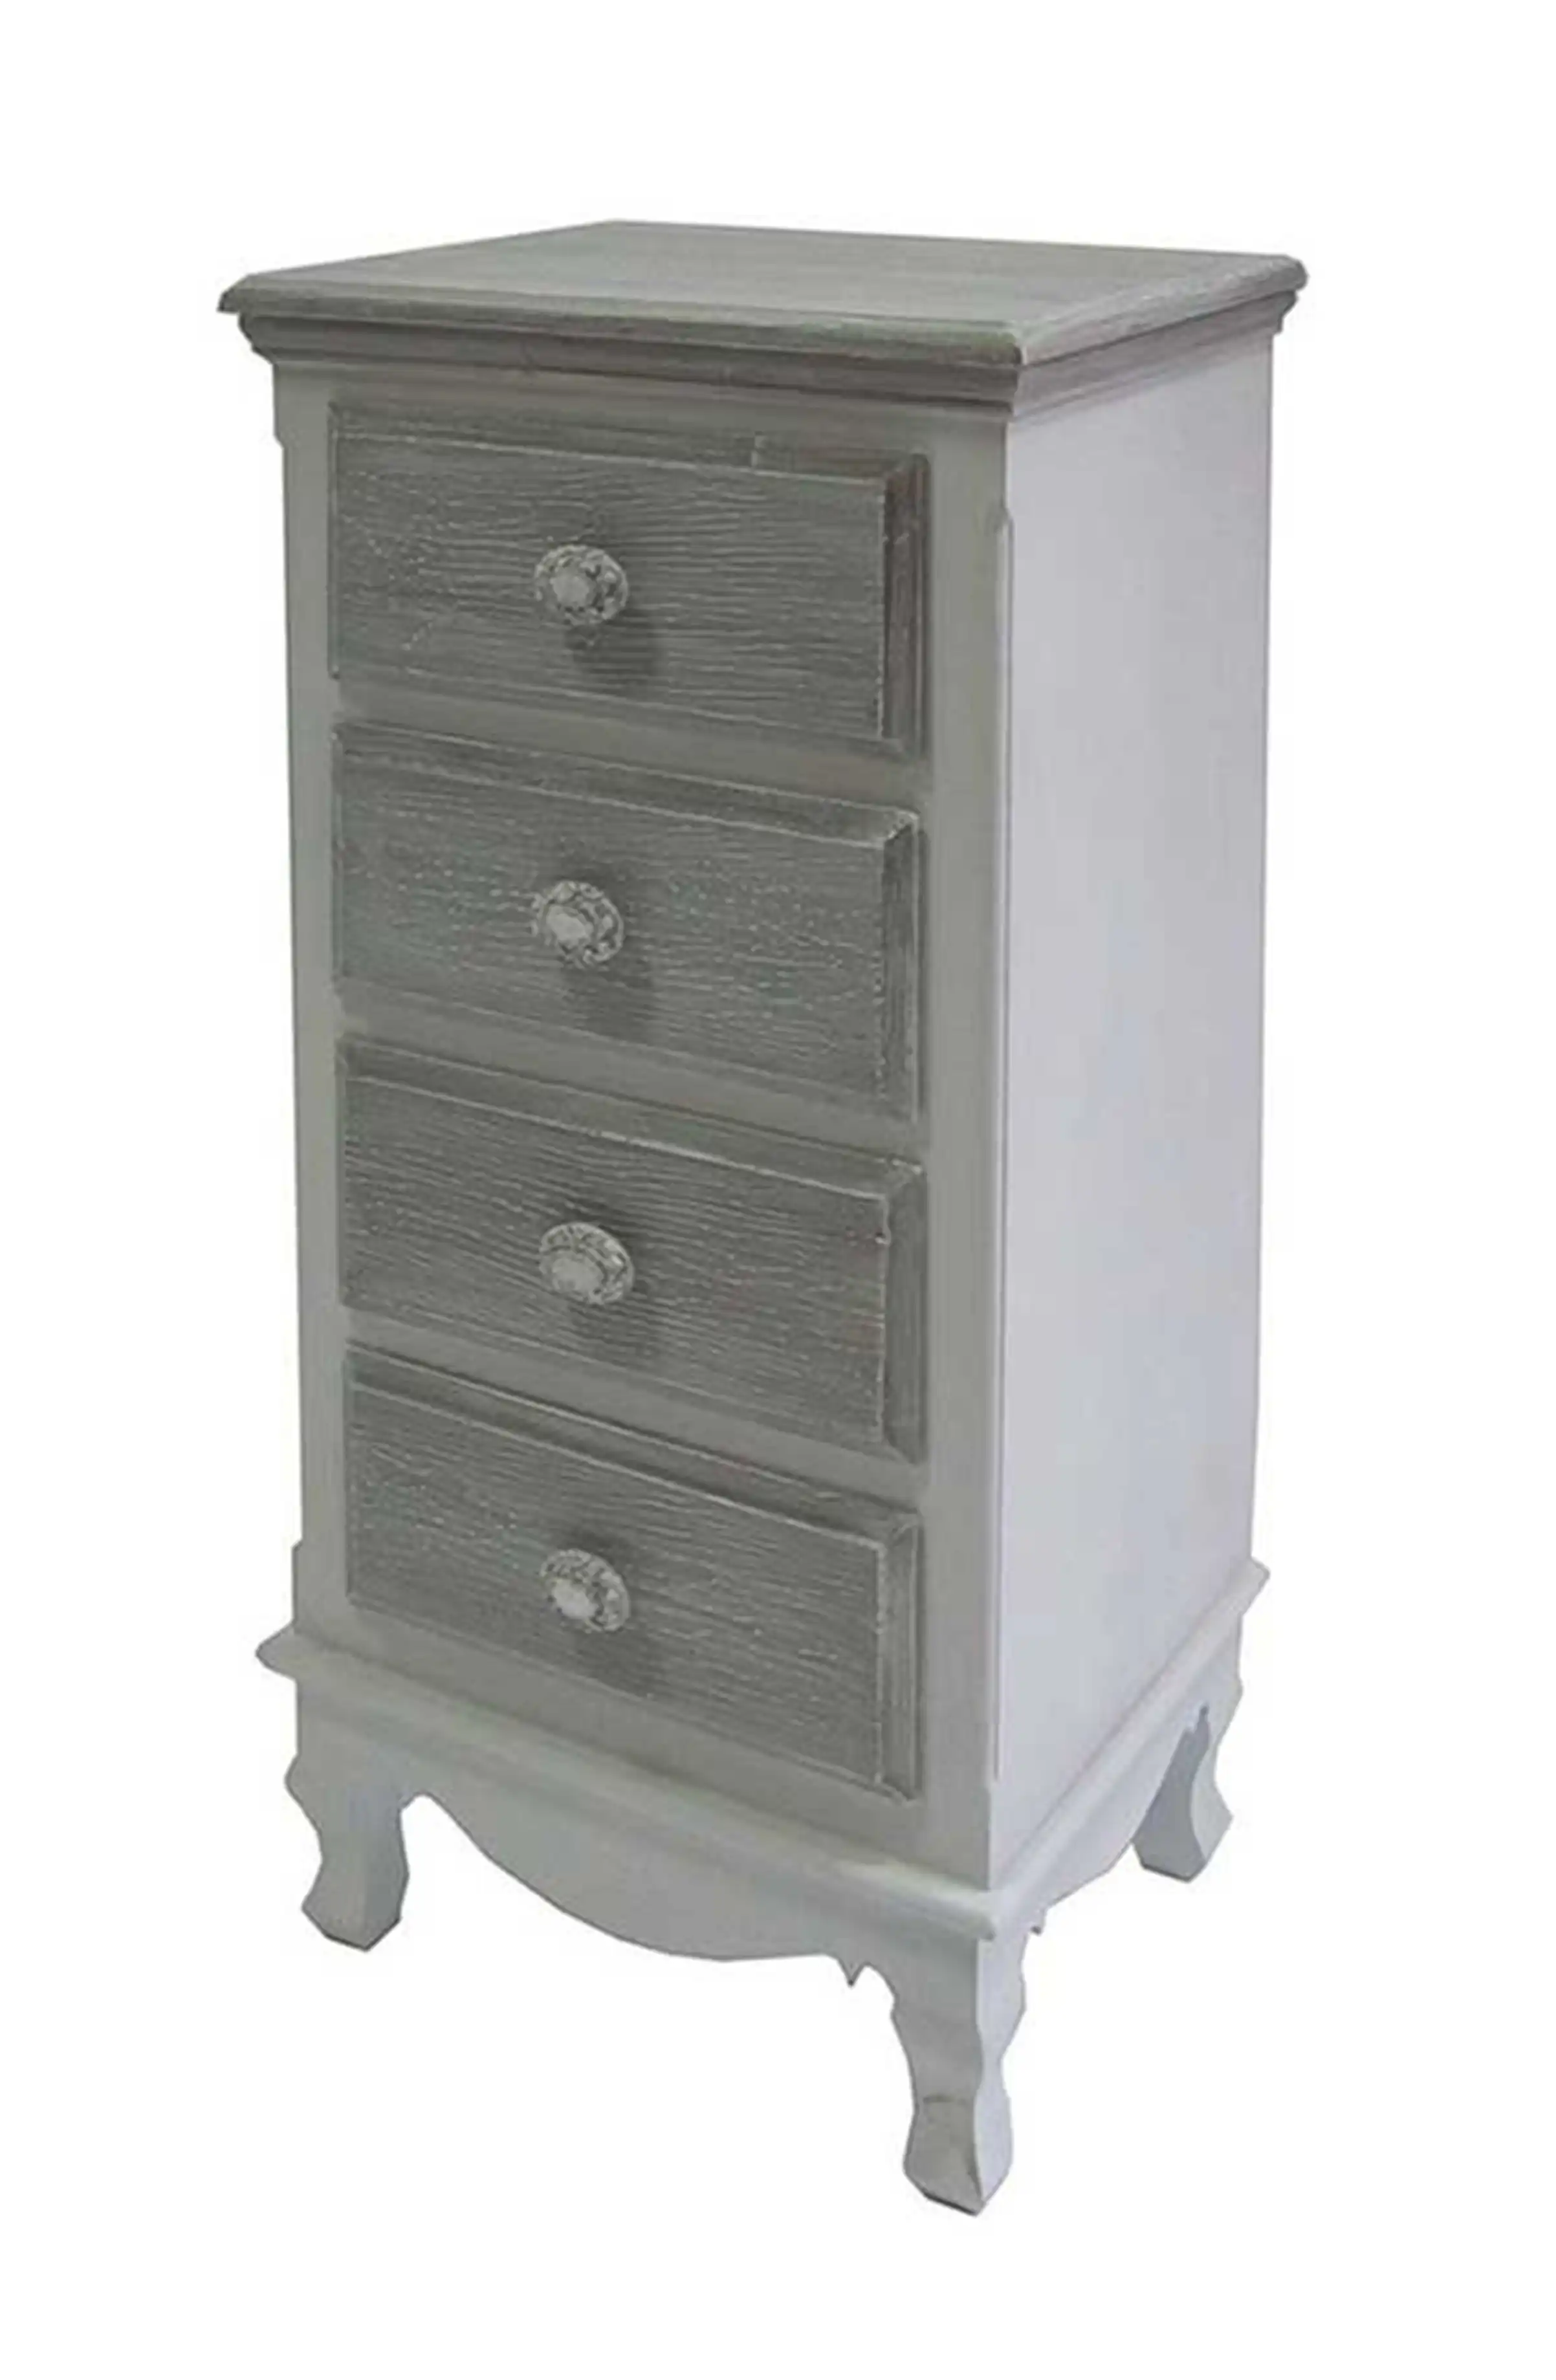 Drawers Chest with 4 drawers - popular handicrafts